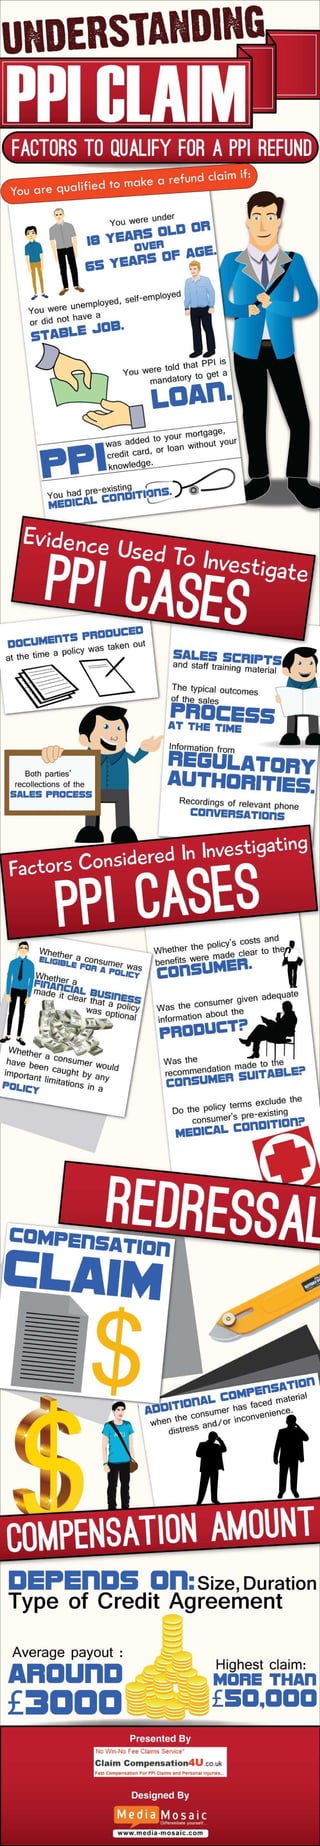 Understanding PPI Claim [Infographic]